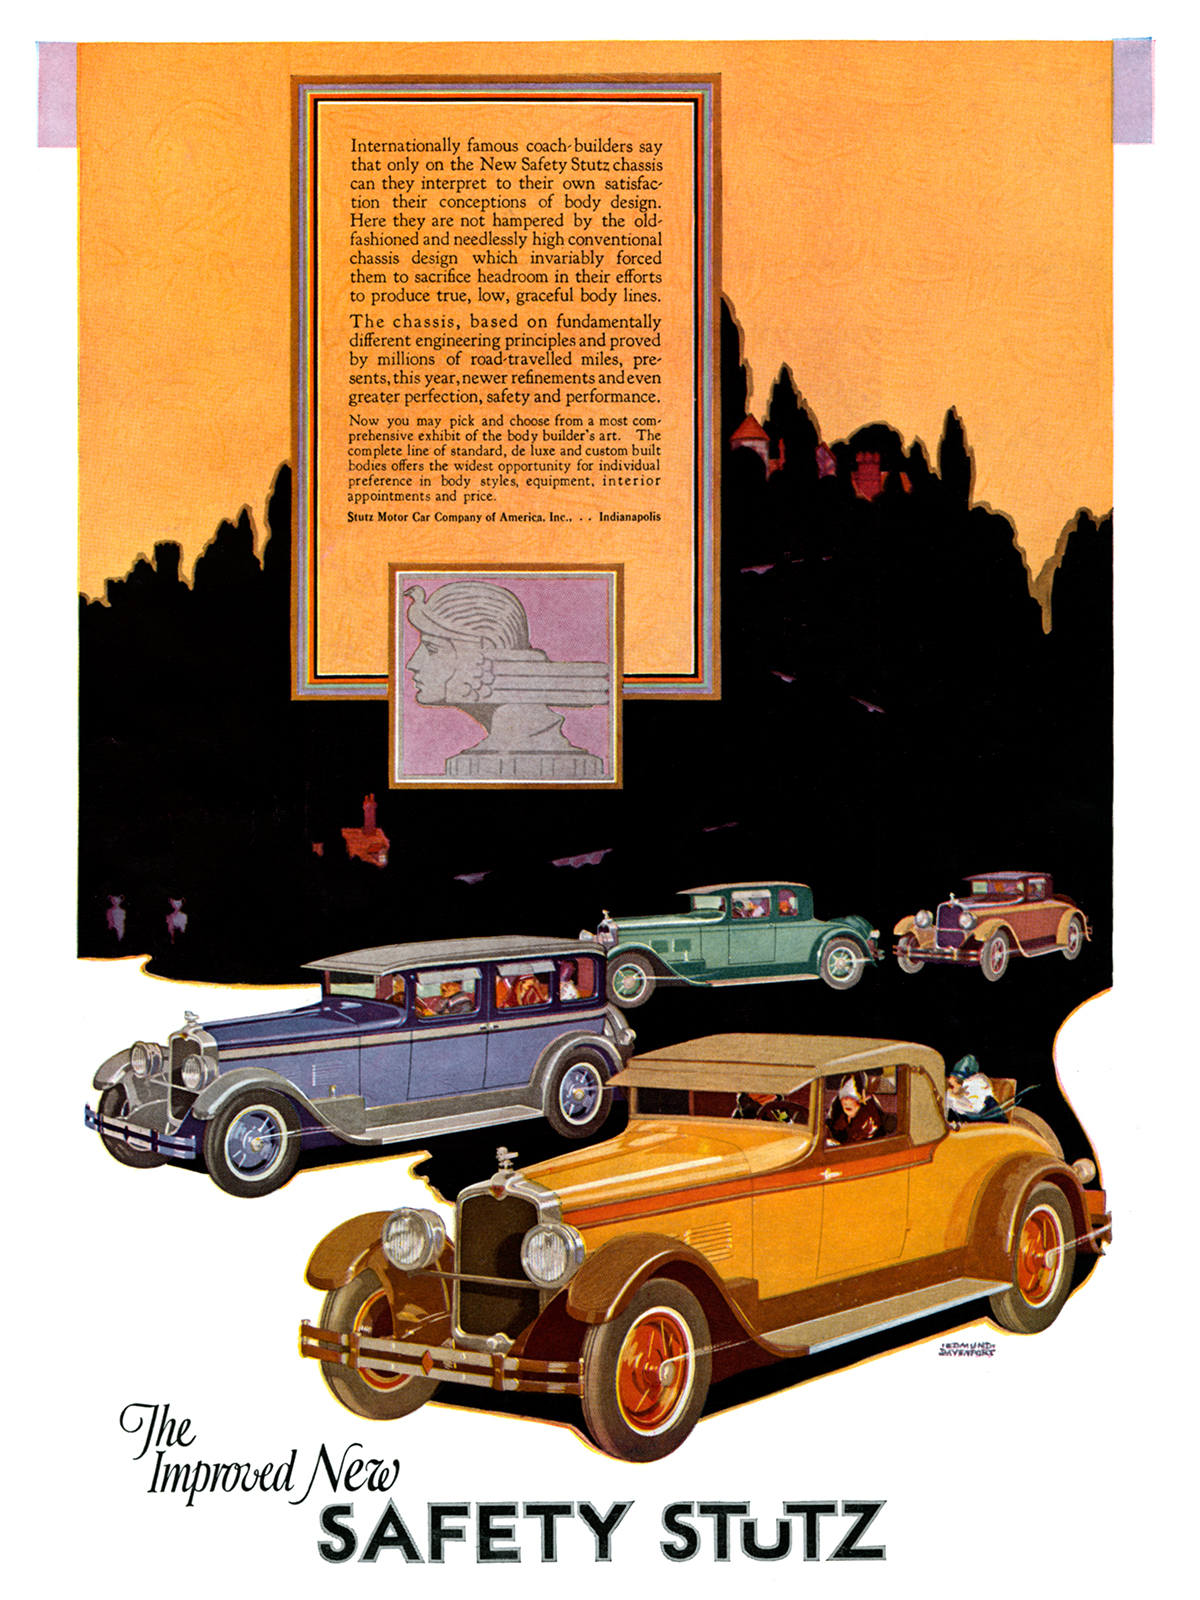 The Improved New Safety Stutz Brochure (1927): Illustrated by Edmund Davenport